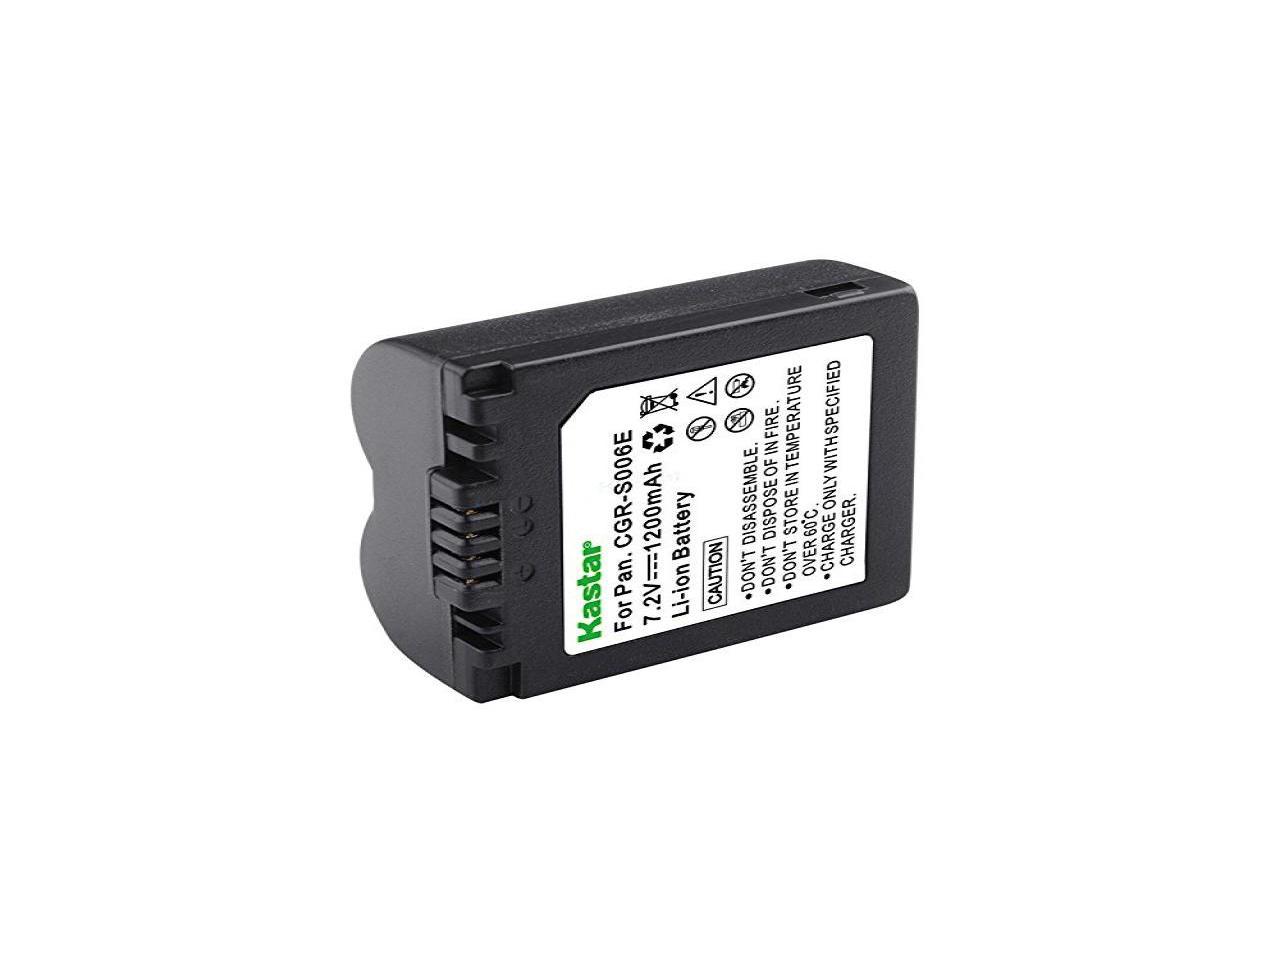 Replacement for Panasonic CGA-S006 Battery 1000mAh 7.4V Lithium-Ion Compatible with Panasonic CGR-S006 Digital Camera Battery